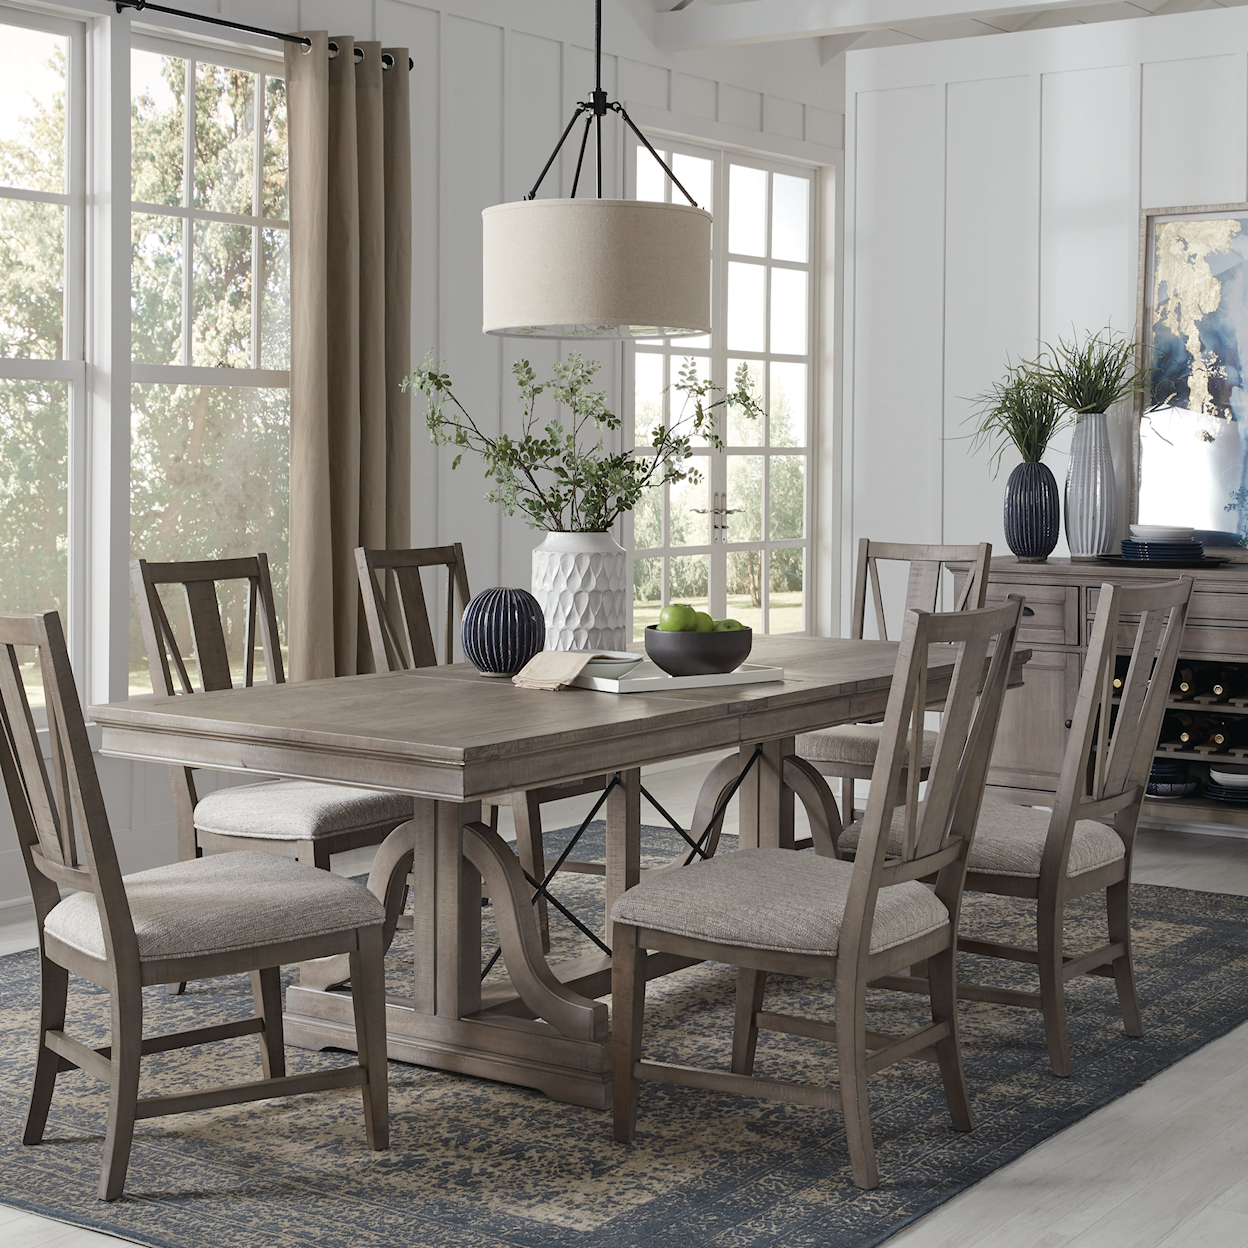 Magnussen Home Paxton Place Dining 7-Piece Dining Set